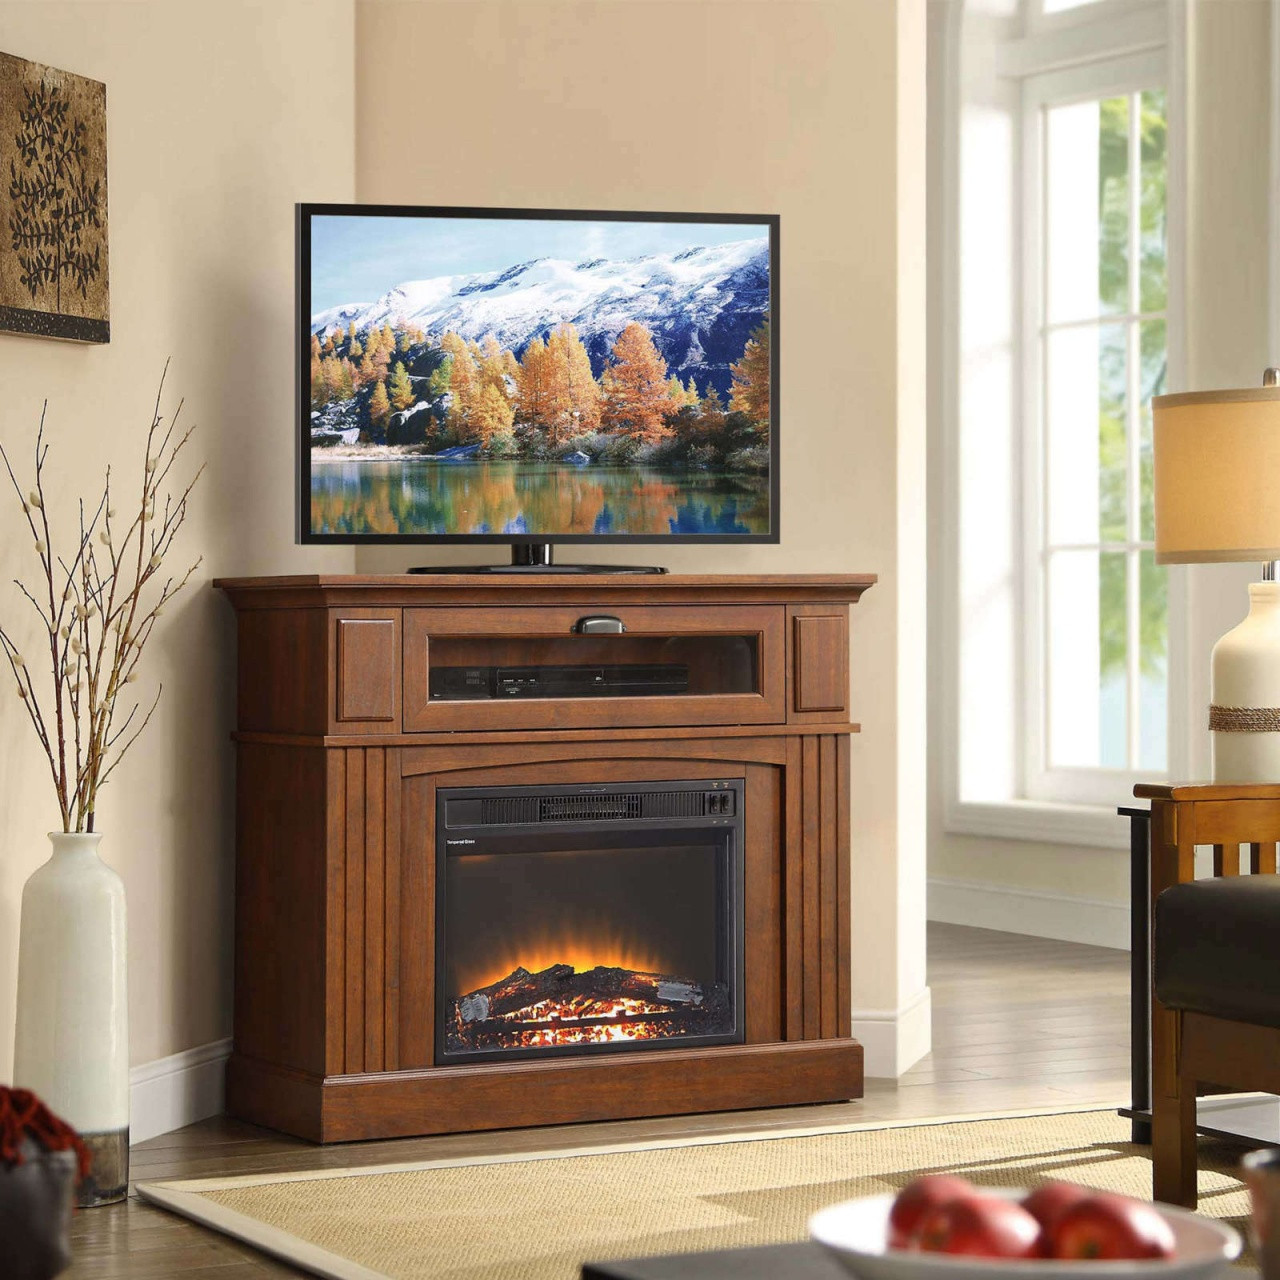 Duraflame Electric Fireplace Tv Stand
 Vertical Wall Mounted Electric Fireplace – FIREPLACE IDEAS